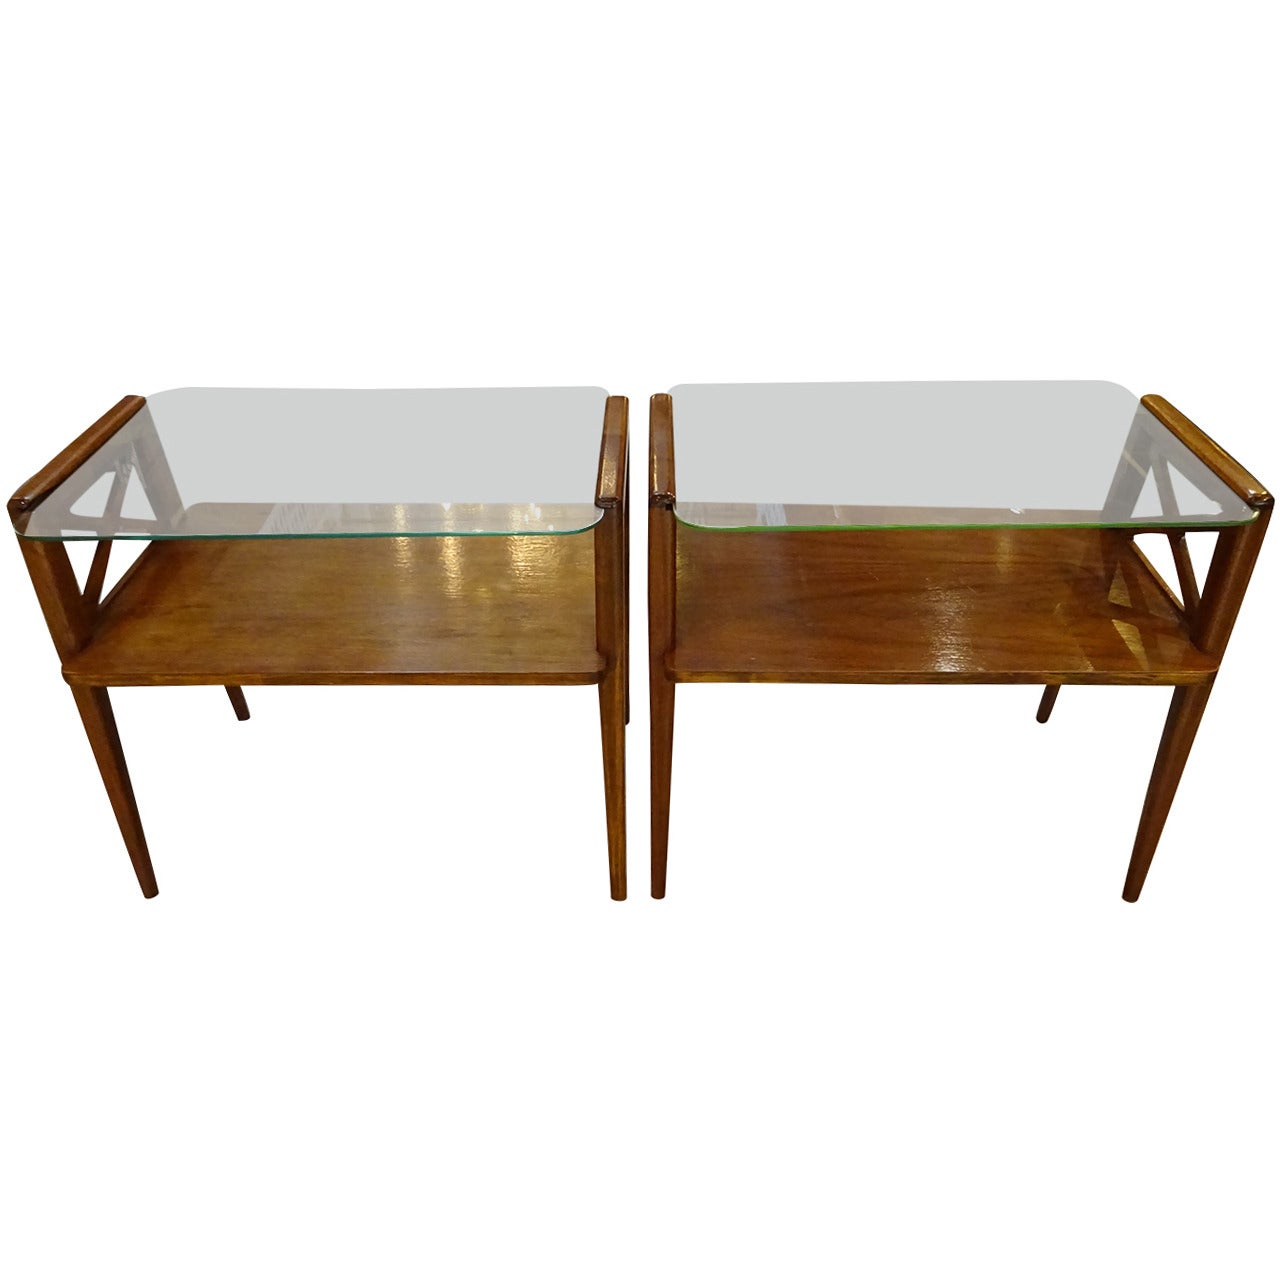 Pair of Tables in the Manner of Jacques Adnet